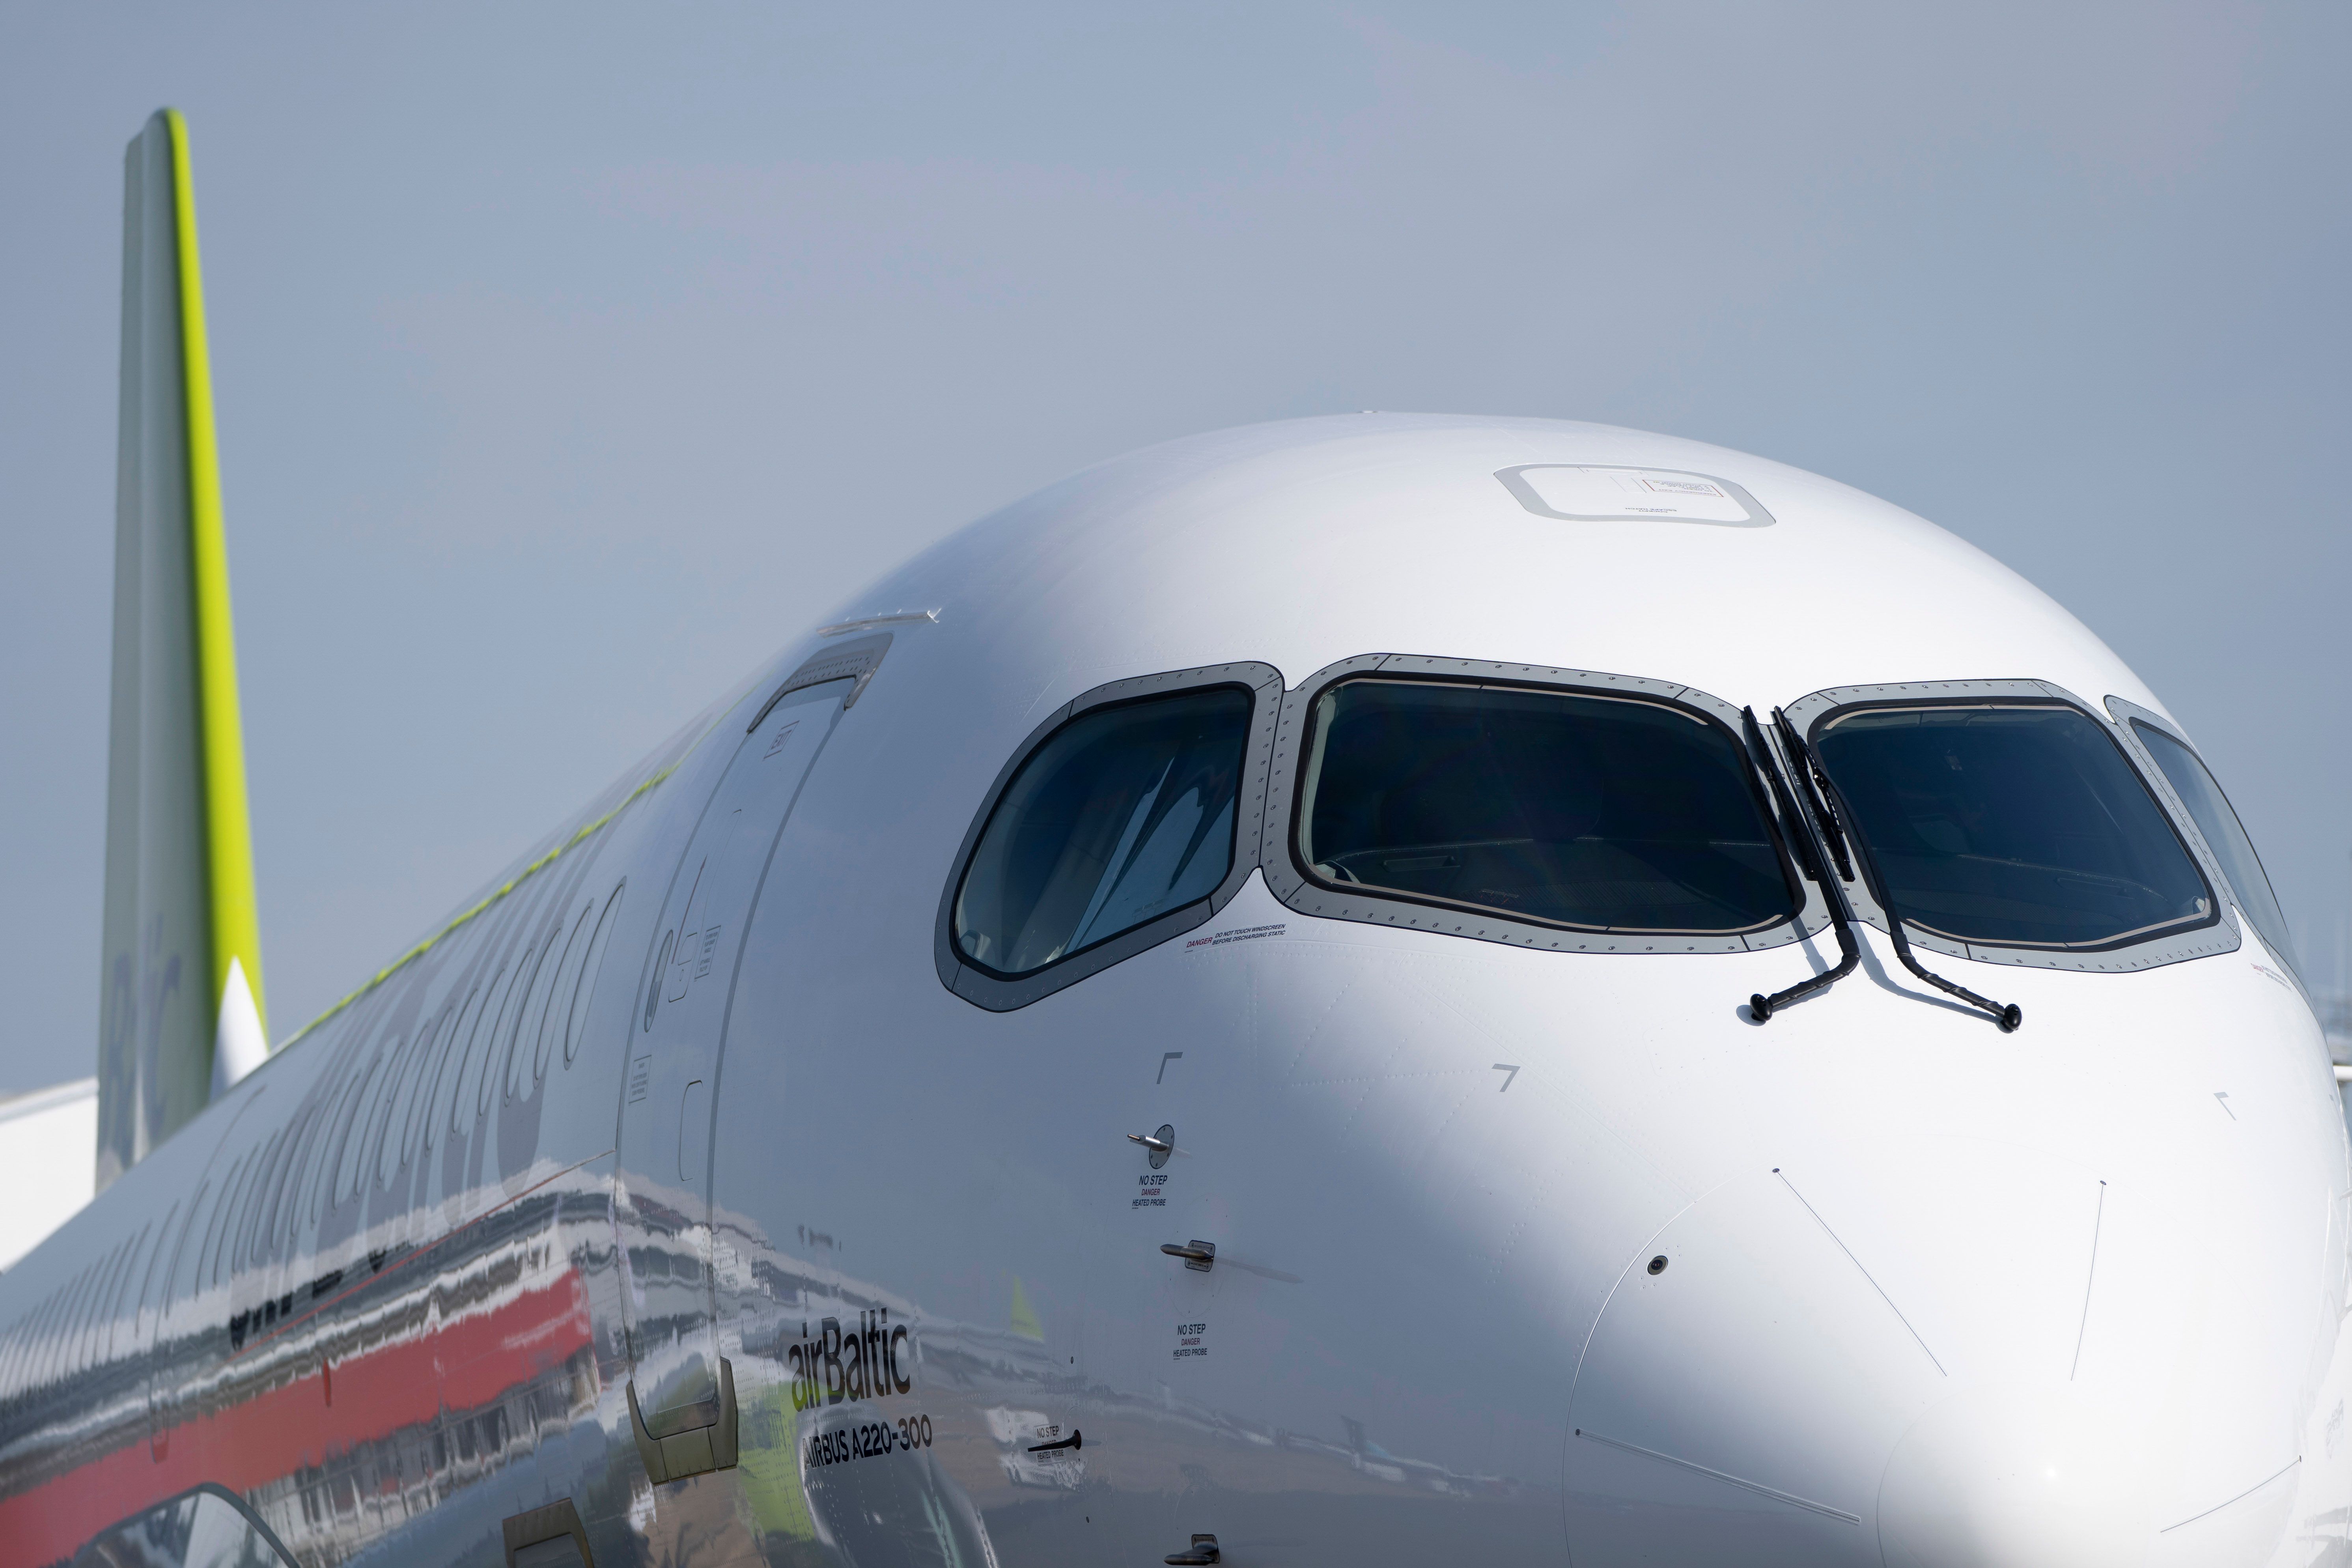 A220-300 airBaltic details at Farnborough airshow - before opening